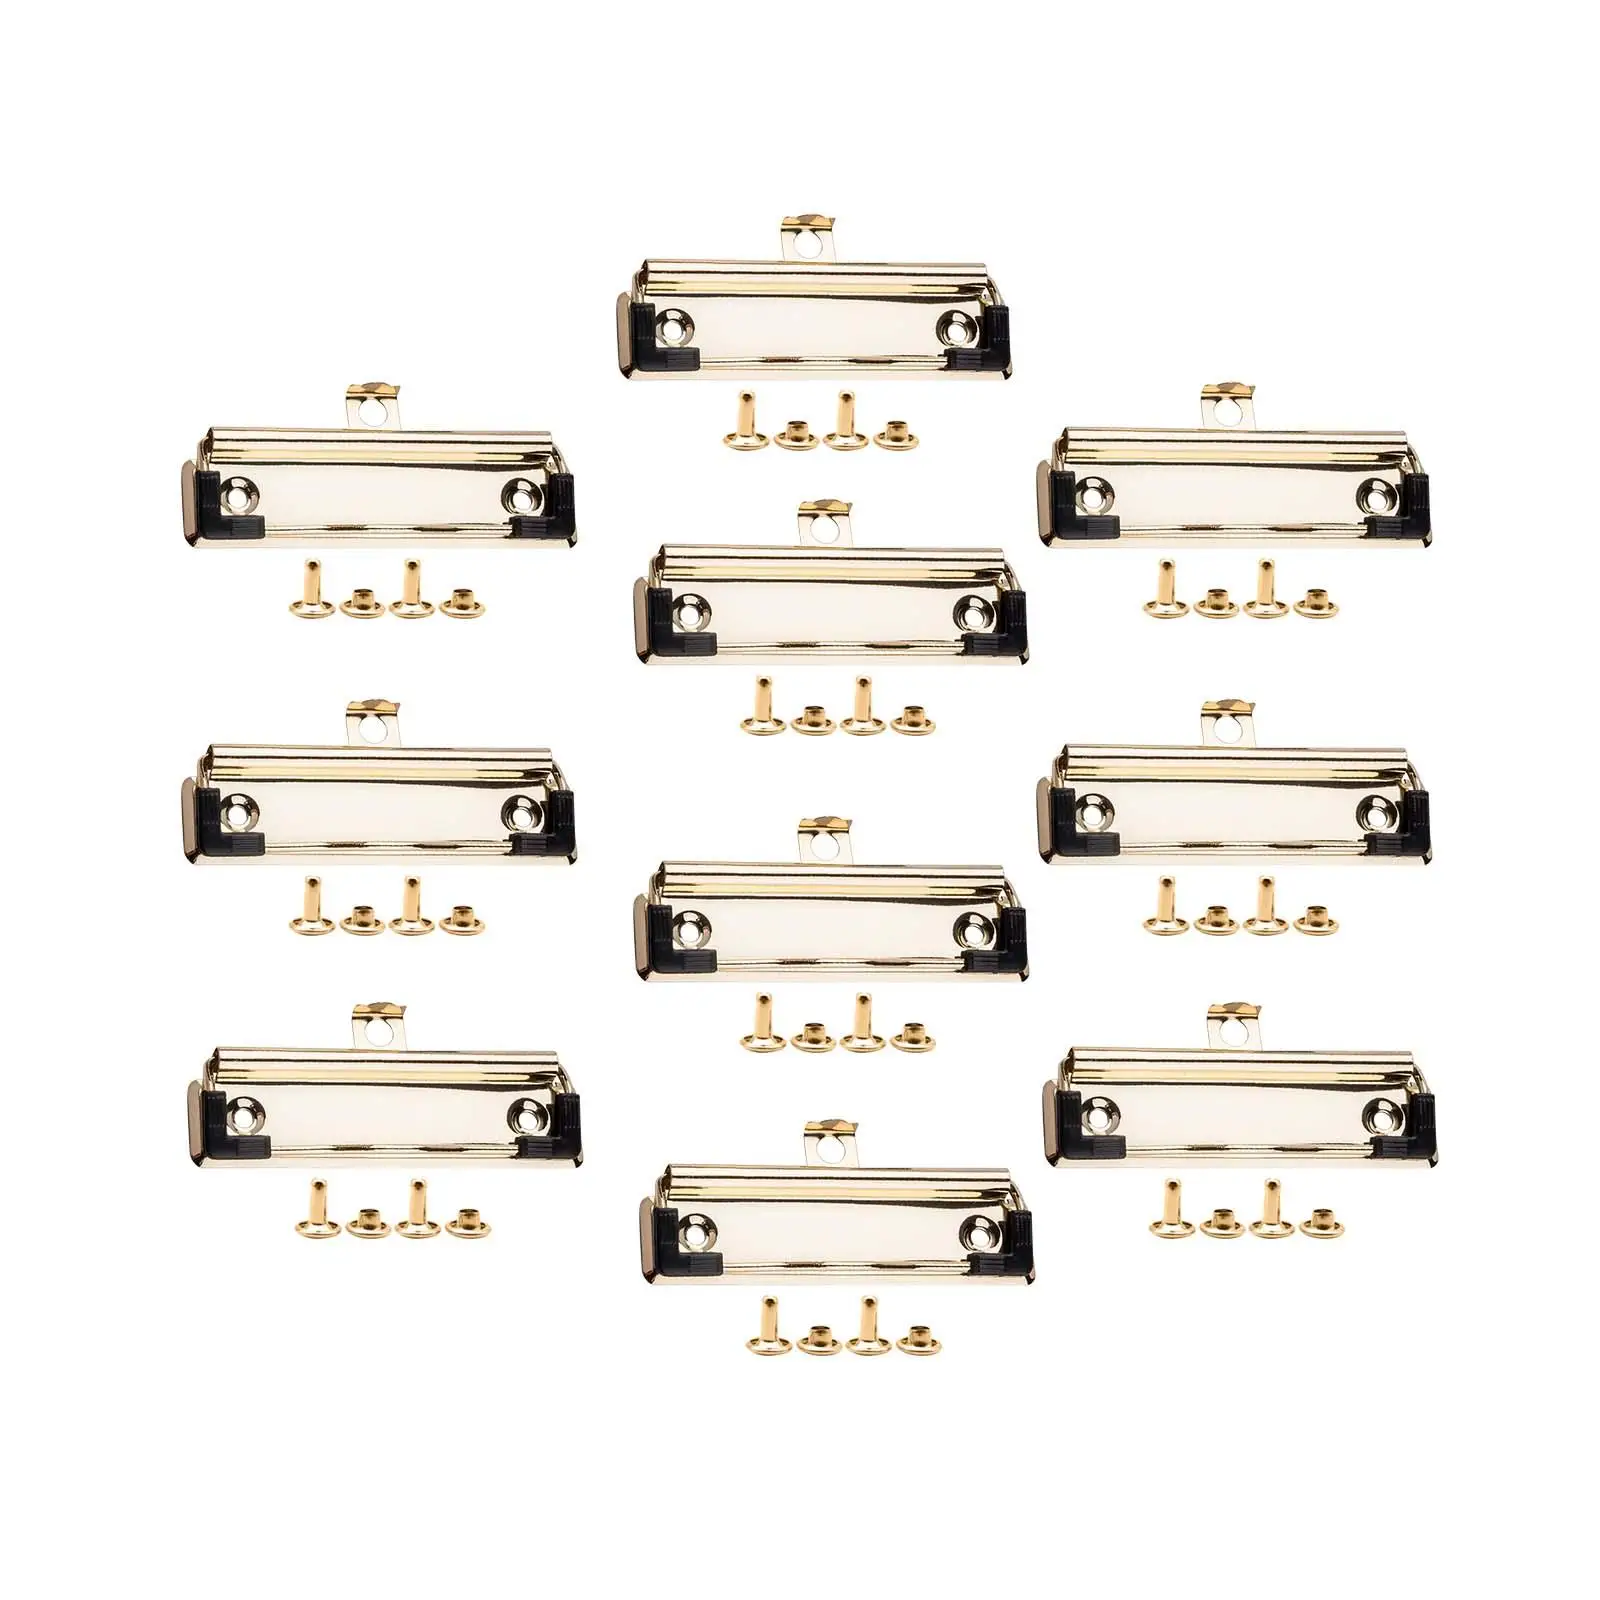 10 Pieces Document File Board Clips Heavy Duty Mountable Hanging Hole Stationery Plate Clips Lightweight Profile Clipboard Clips